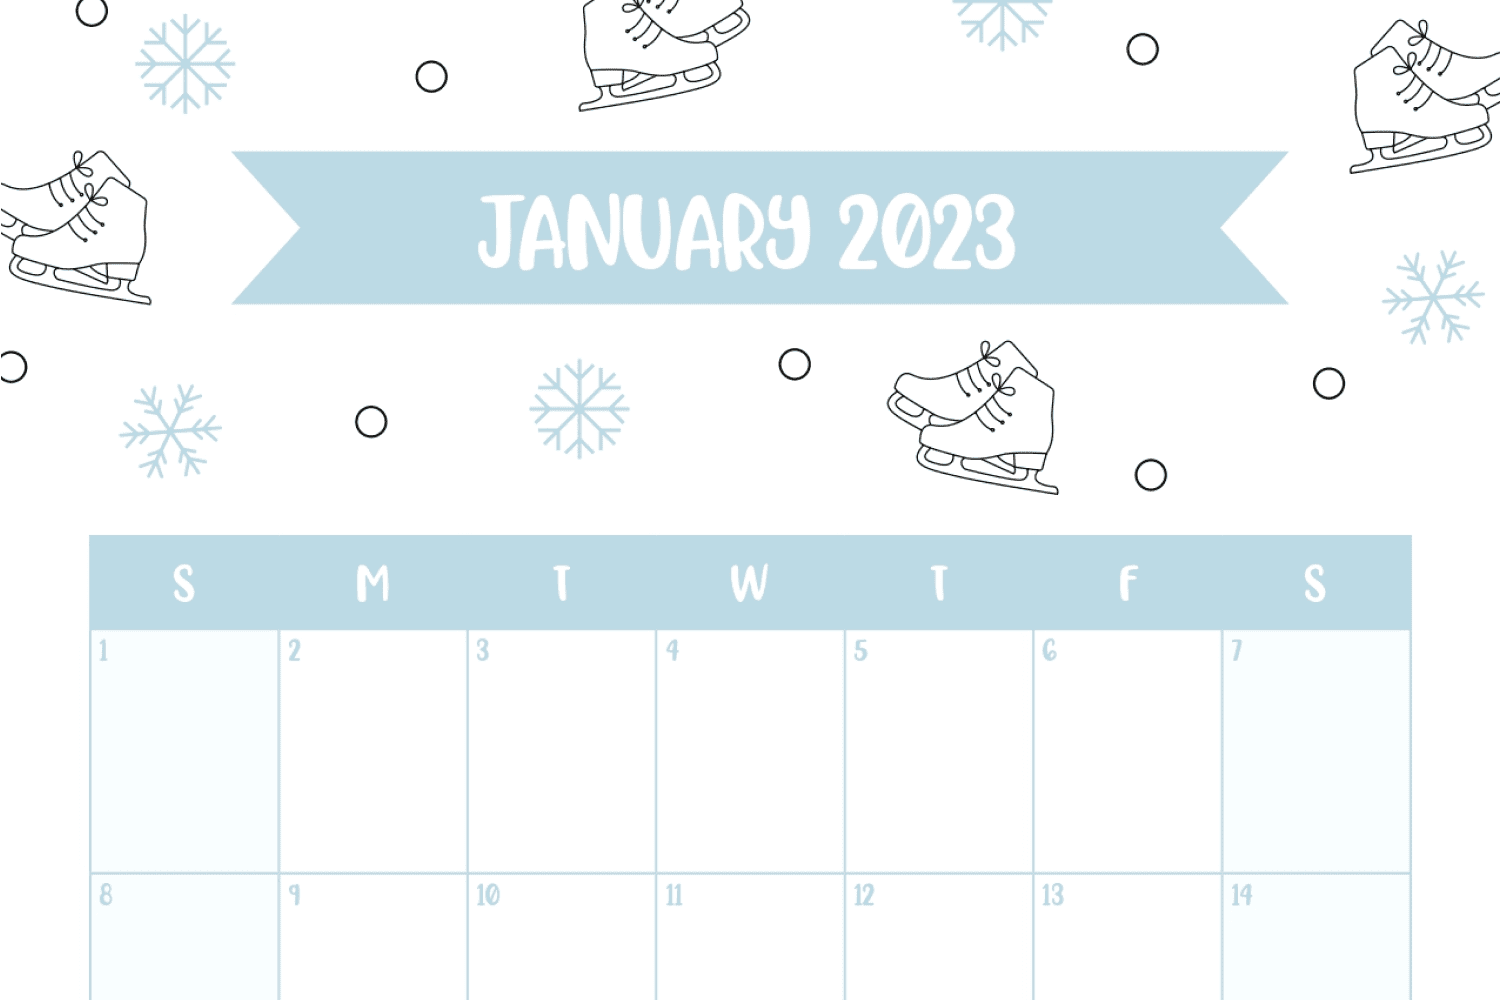 January calendar in a minimalist style with the image of skates and snowflakes.